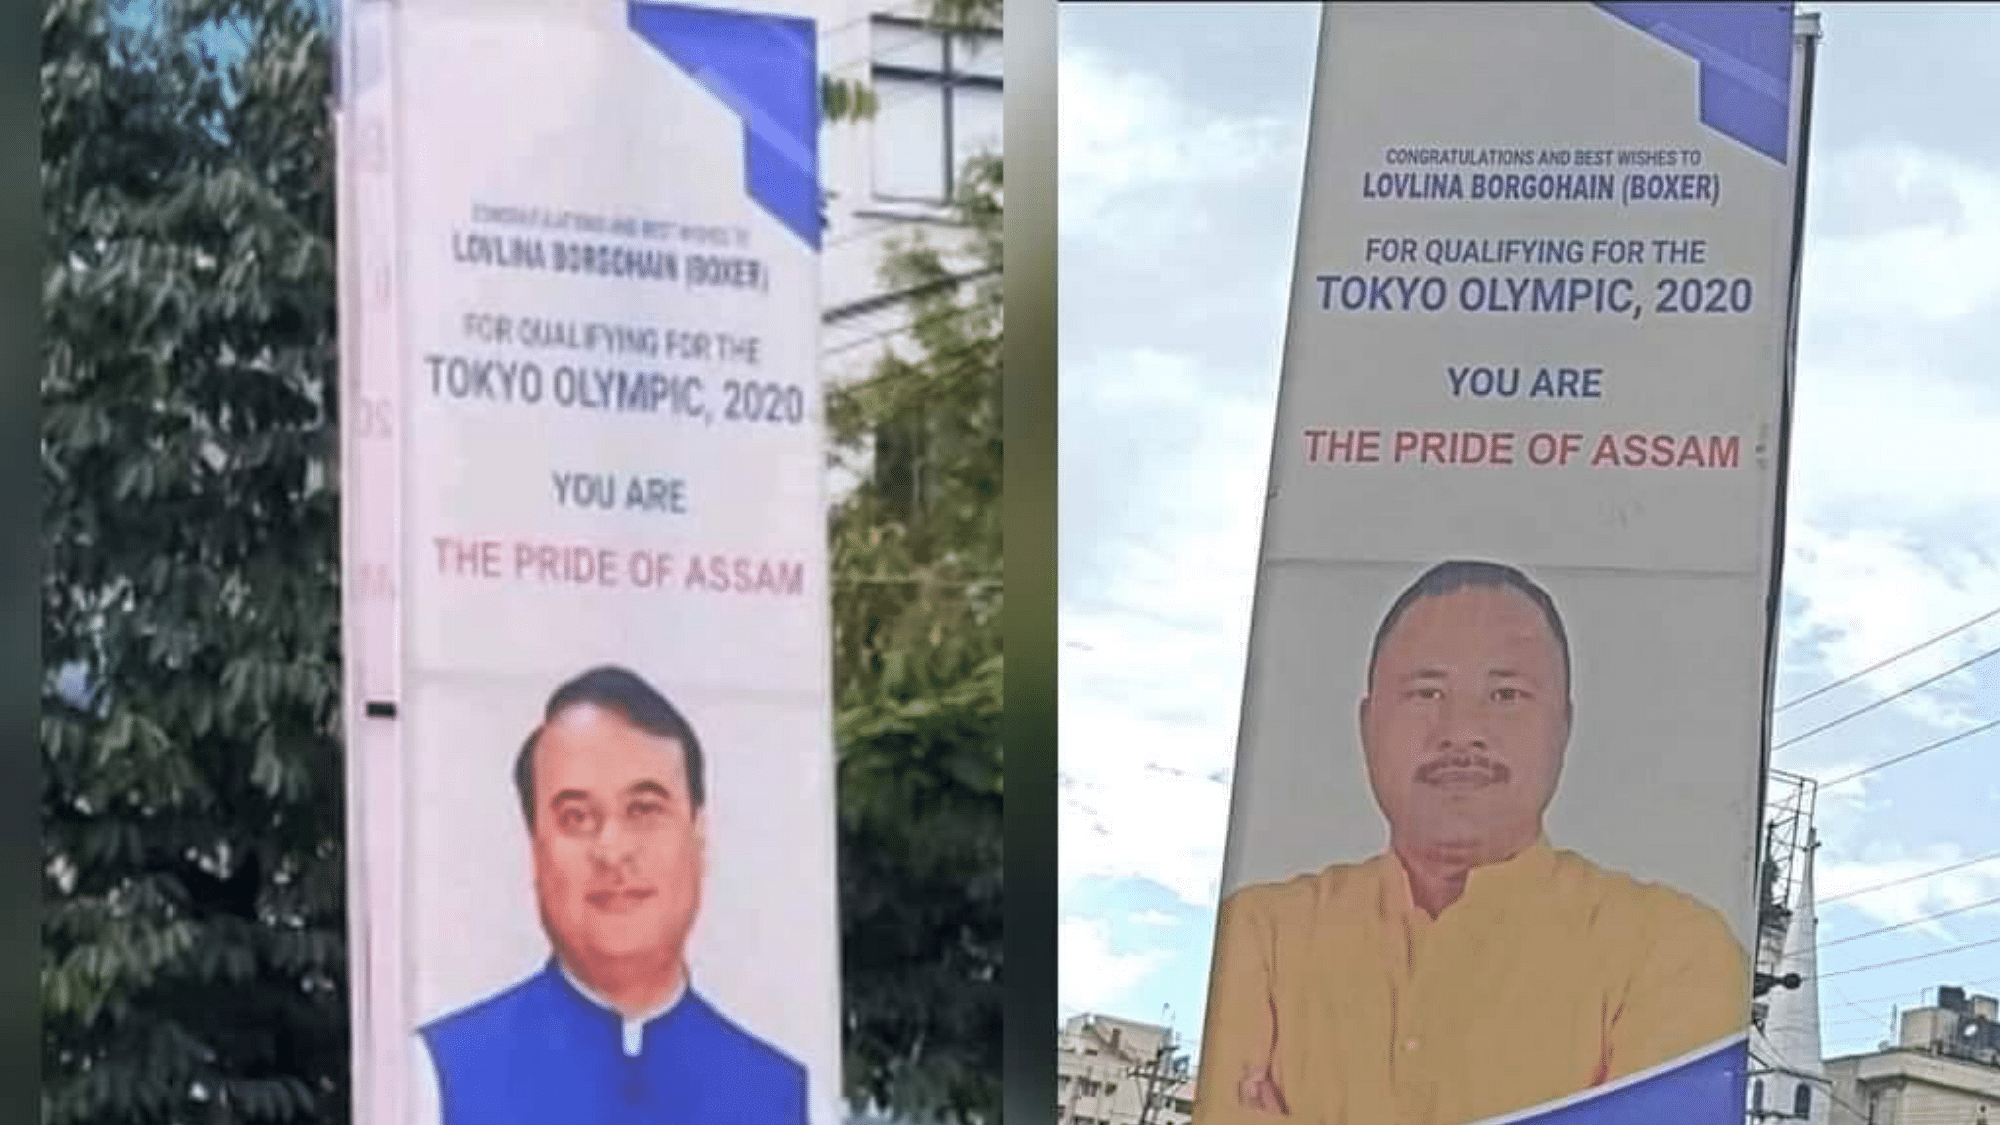 <div class="paragraphs"><p>Banners in Guwahati to congratulate Lovlina Borgohain where the boxer was nowhere to be seen.</p></div>